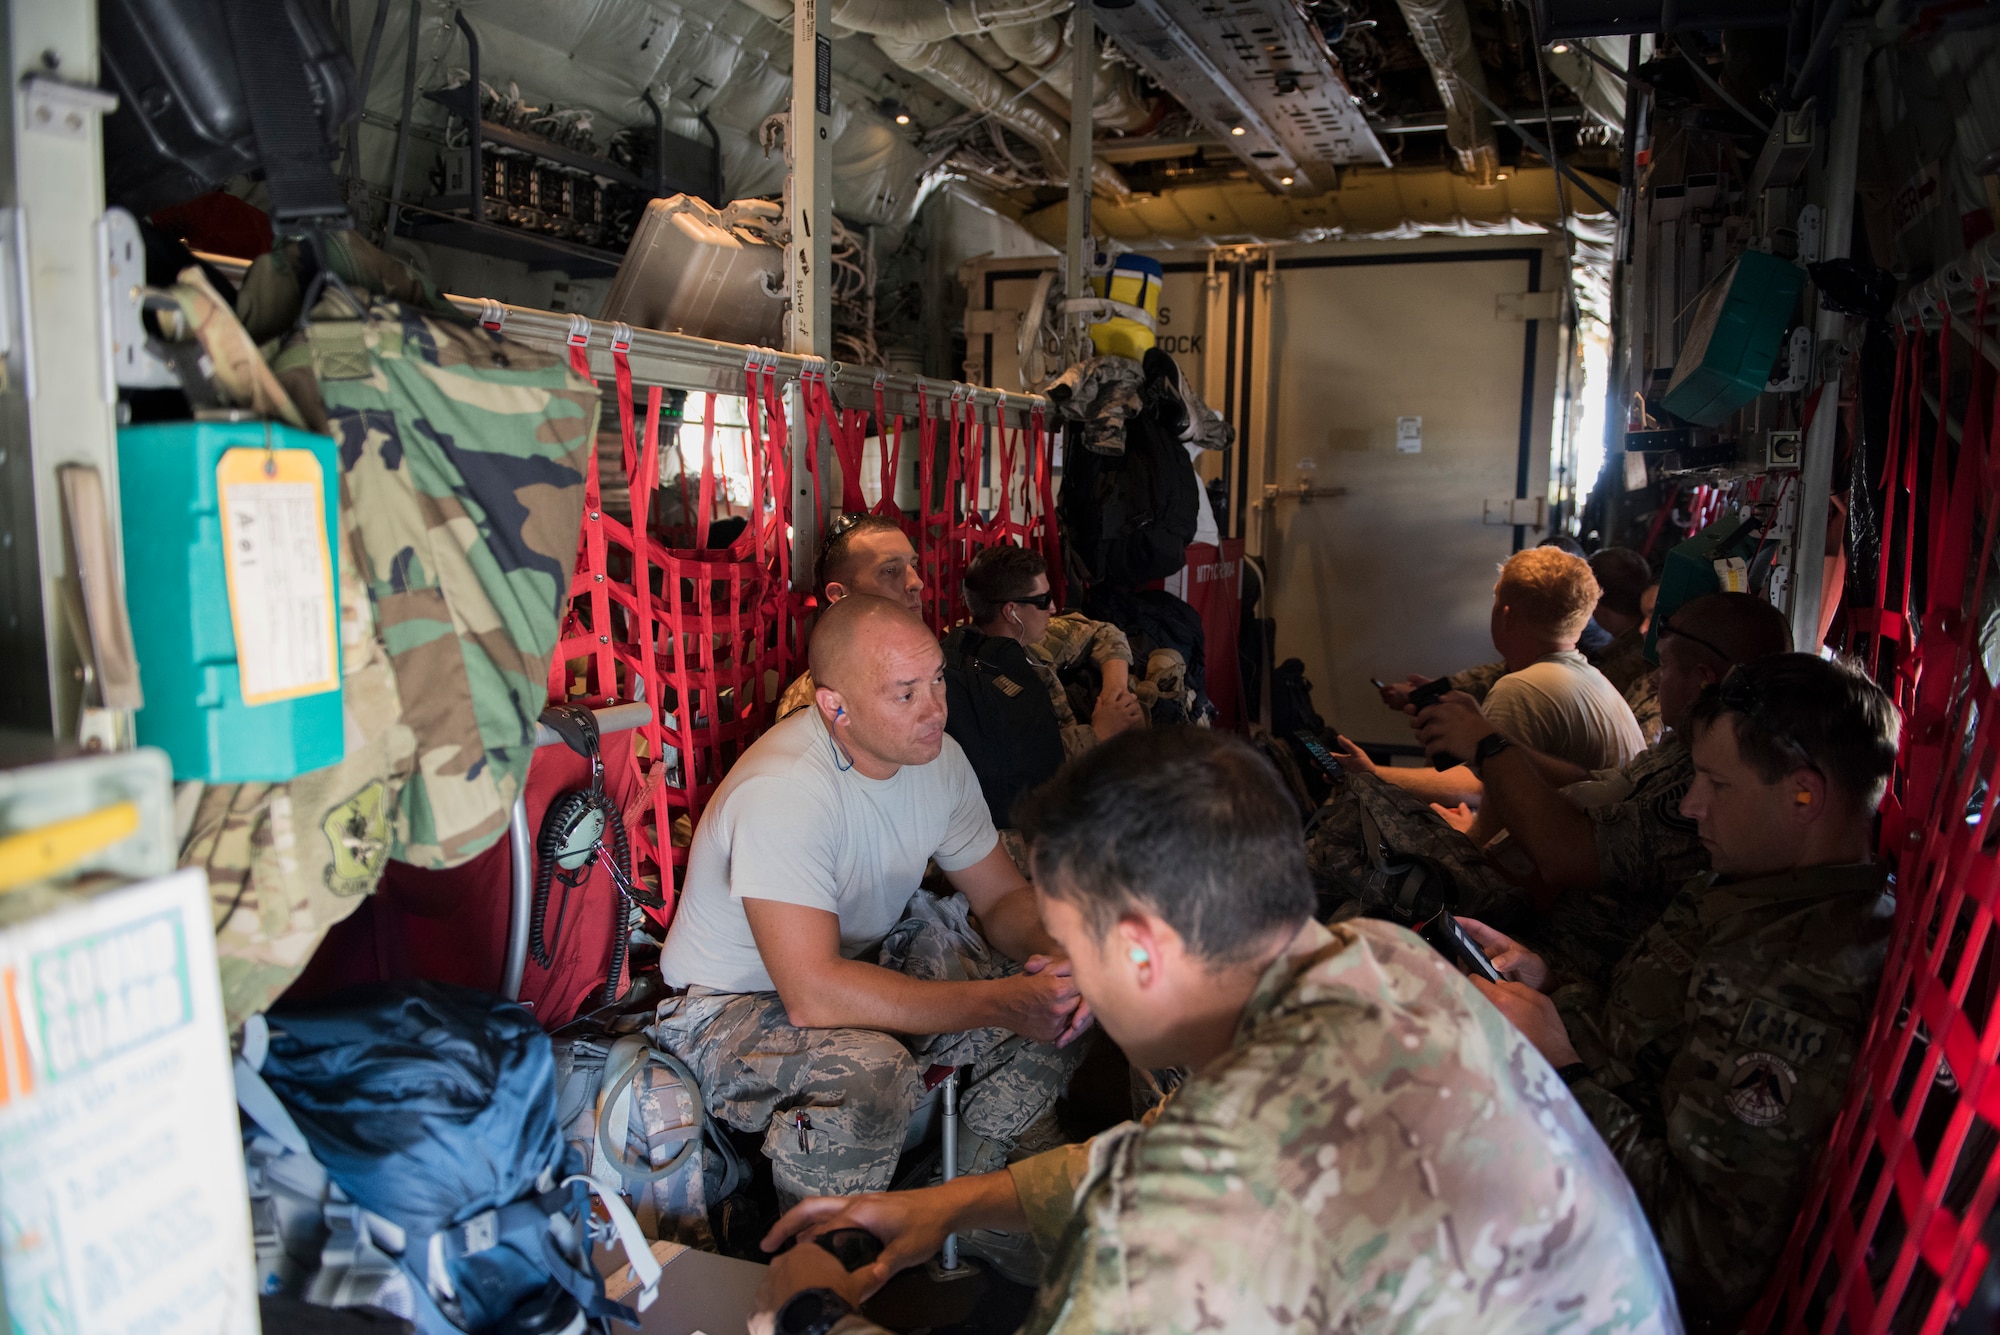 Airmen wait to depart on a HC-130J Combat King II, Sept. 15, 2018, at Moody Air Force Base, Ga. The 334th Air Expeditionary Group launched HC-130J Combat King IIs, HH-60G Pavehawks, aircrew and support personnel to pre-position at Joint Base Charleston, S.C., for potential Tropical Storm Florence response. Under the command of Col. John Creel, the 374th Rescue Group commander, the AEG integrated to make one expeditionary search and rescue unit comprised of rescue and support personnel from both the 23d Wing, 920th Rescue Wing at Patrick Air Force Base, Fla., and 51st Communications Squadron at Warner Robins Air Force Base, Ga.  (U.S. Air Force photo by Staff Sgt. Eric Summers Jr.)